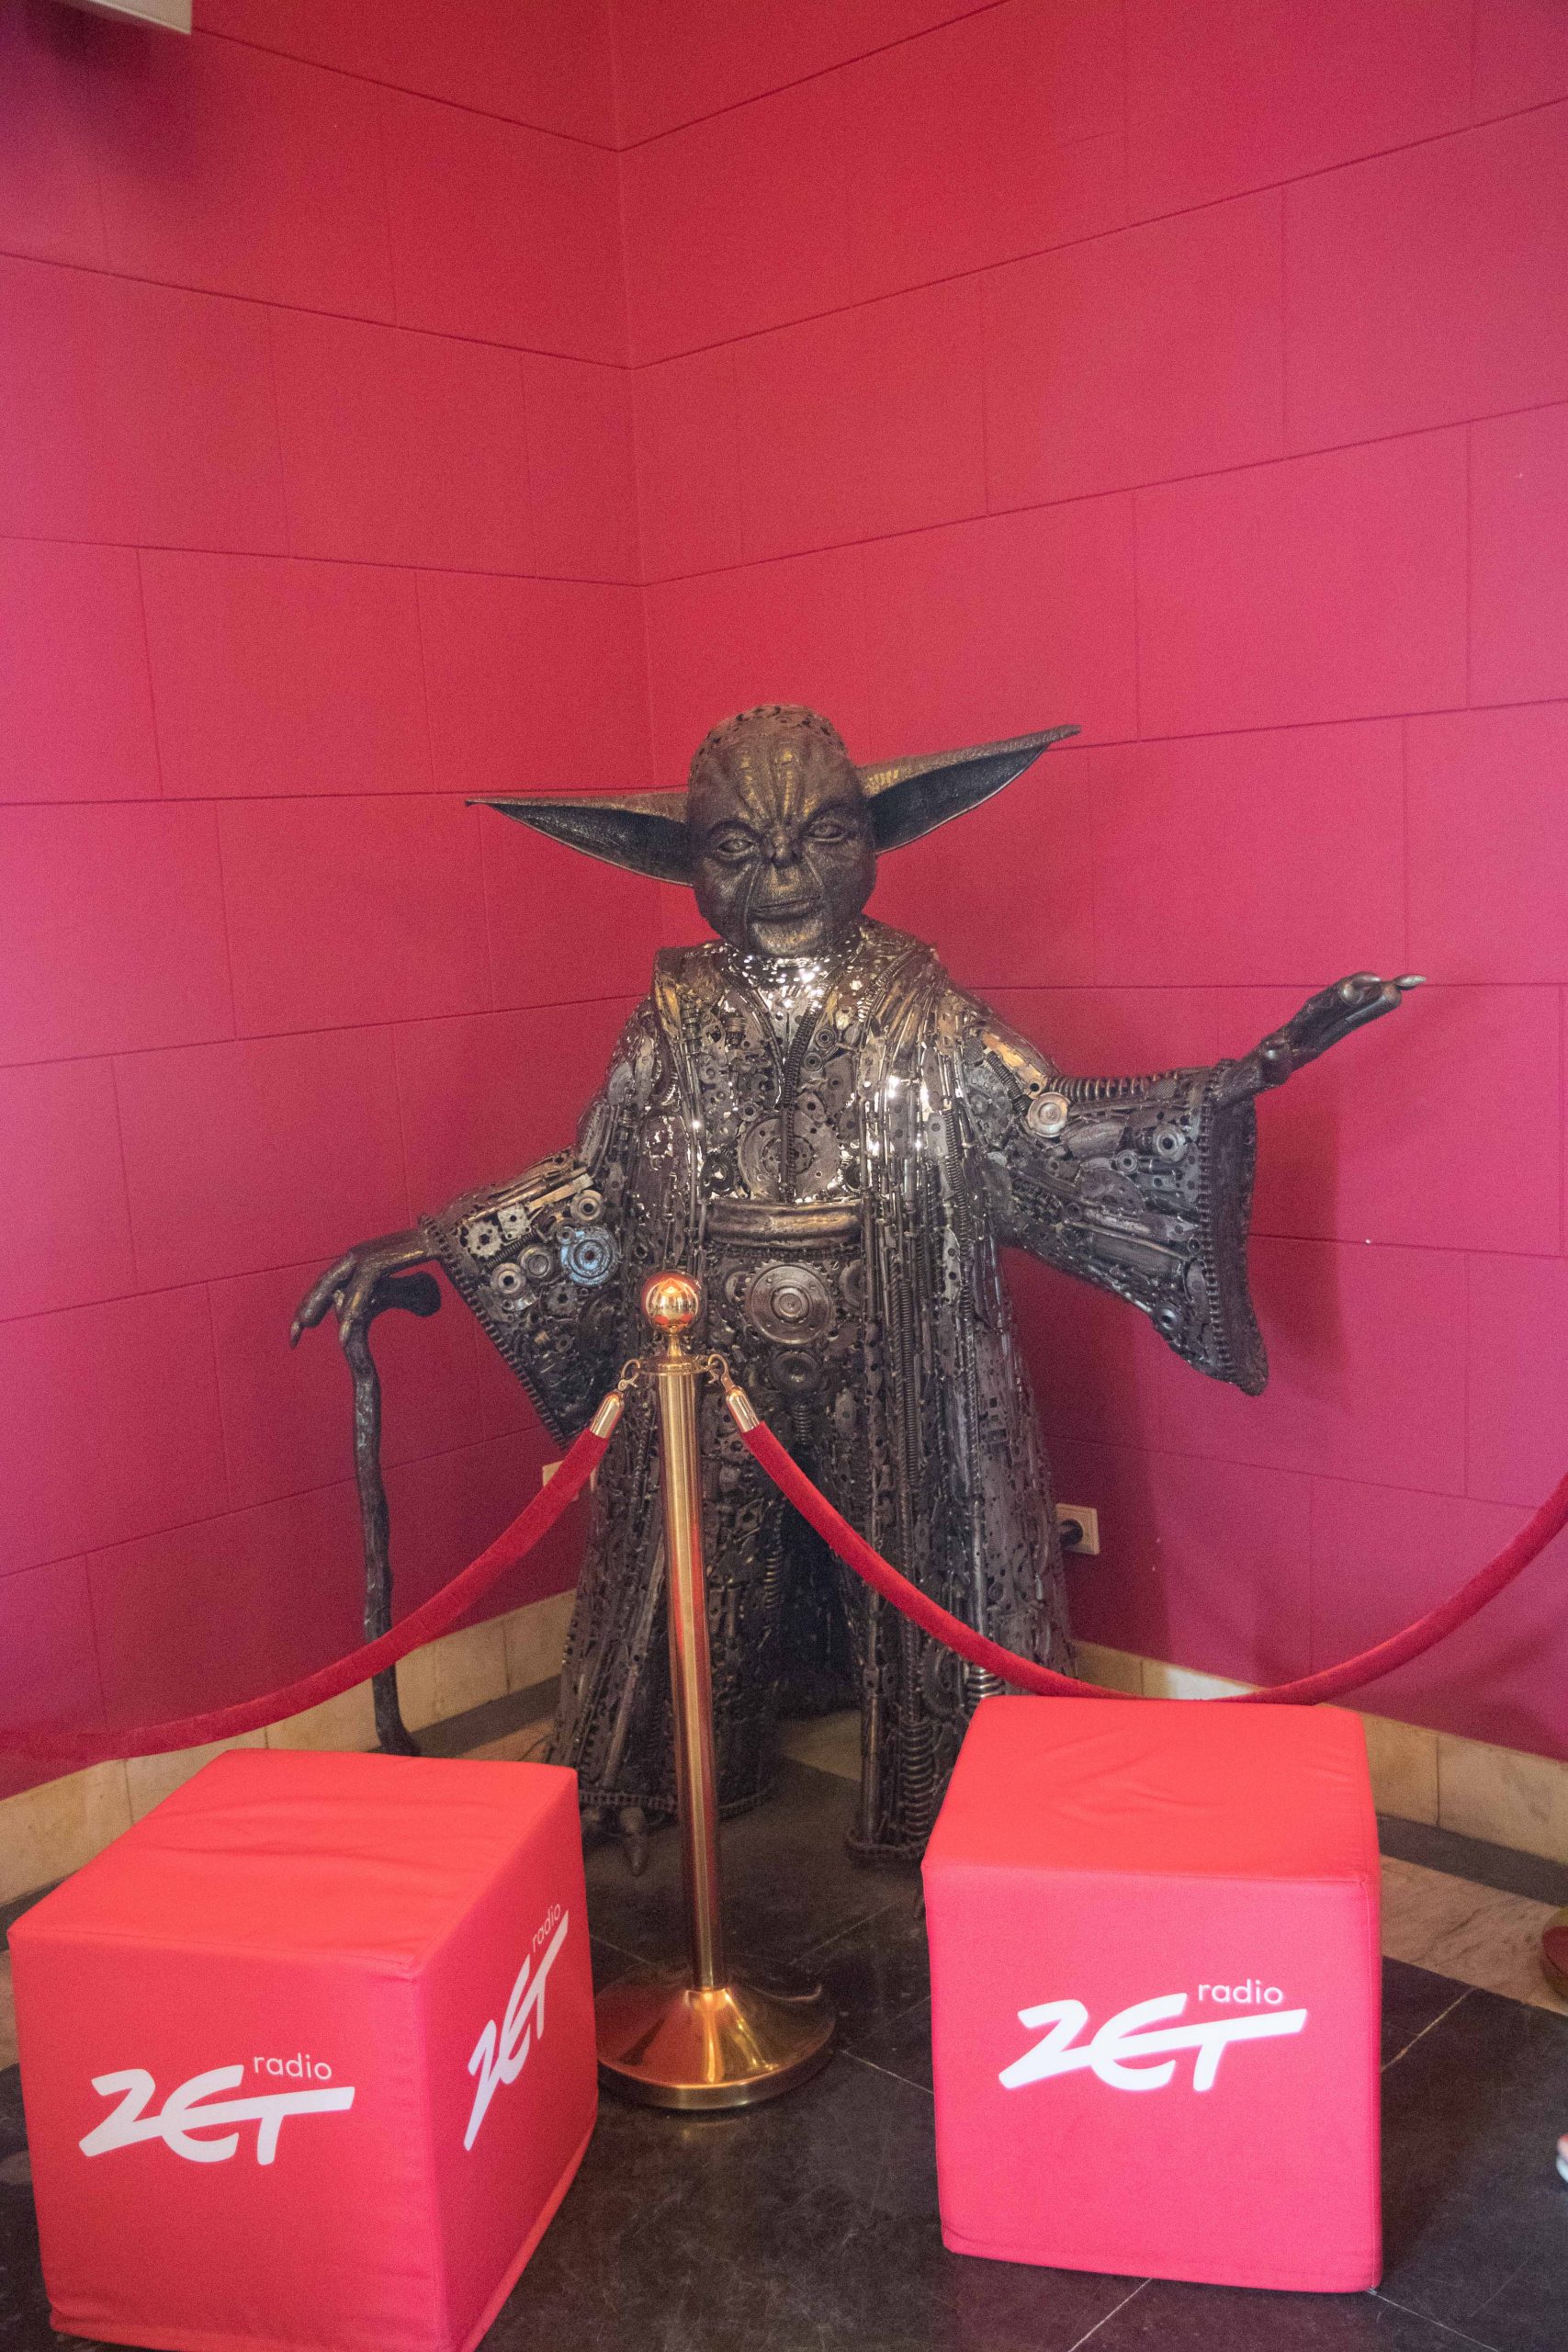 Welcome to the Place of Culture and Science! This was the last place I expected to find statue of Yoda.
Welcome to Poland!